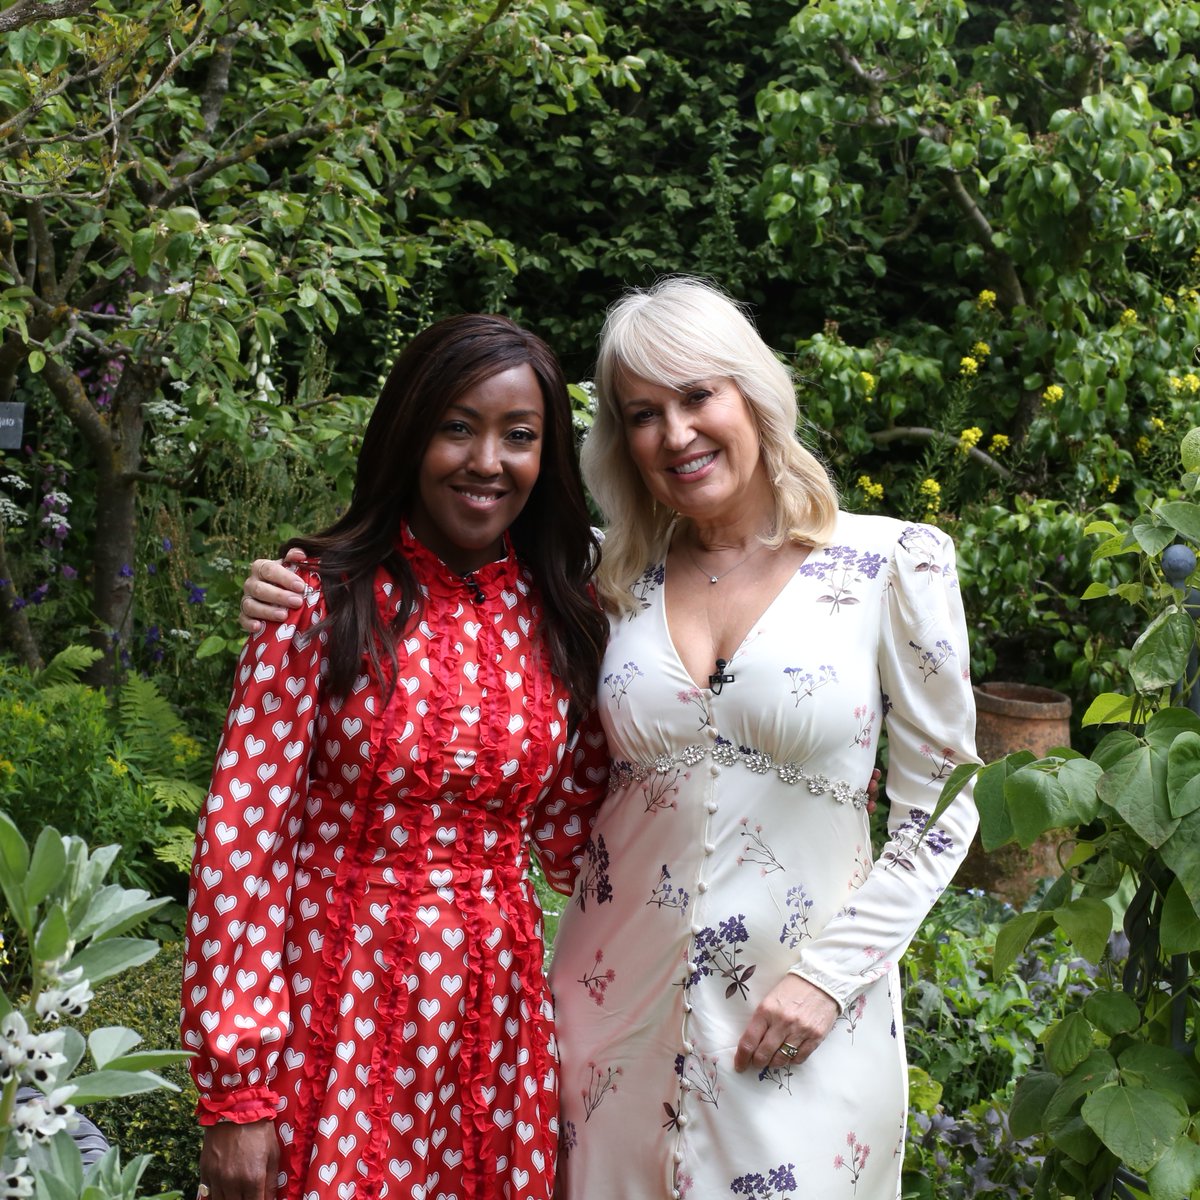 Send us your #ChelseaClinic questions! 

Our weekday show at 3.45pm on @BBCOne  with @angellicabell @Nicki_Chapman will feature your questions in the #ChelseaClinic 

Let us know what horticultural help you need below 

#BBCChelsea #ChelseaFlowerShow2024 #Gardening #GardeningTips